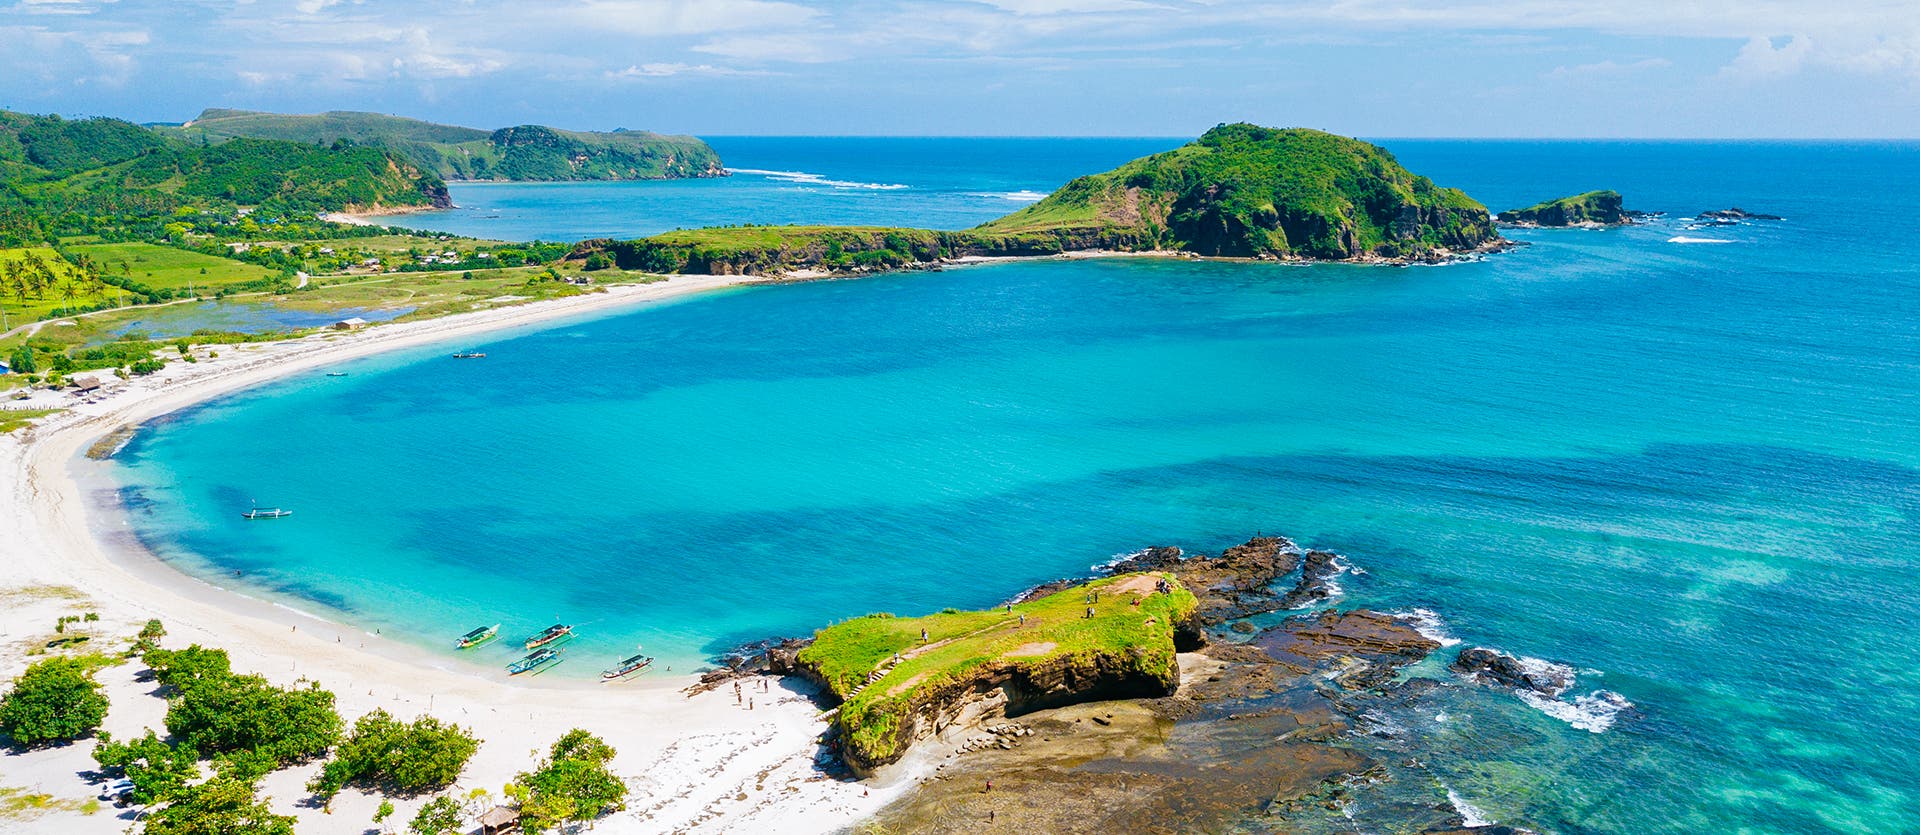 What to see in Indonesia Lombok